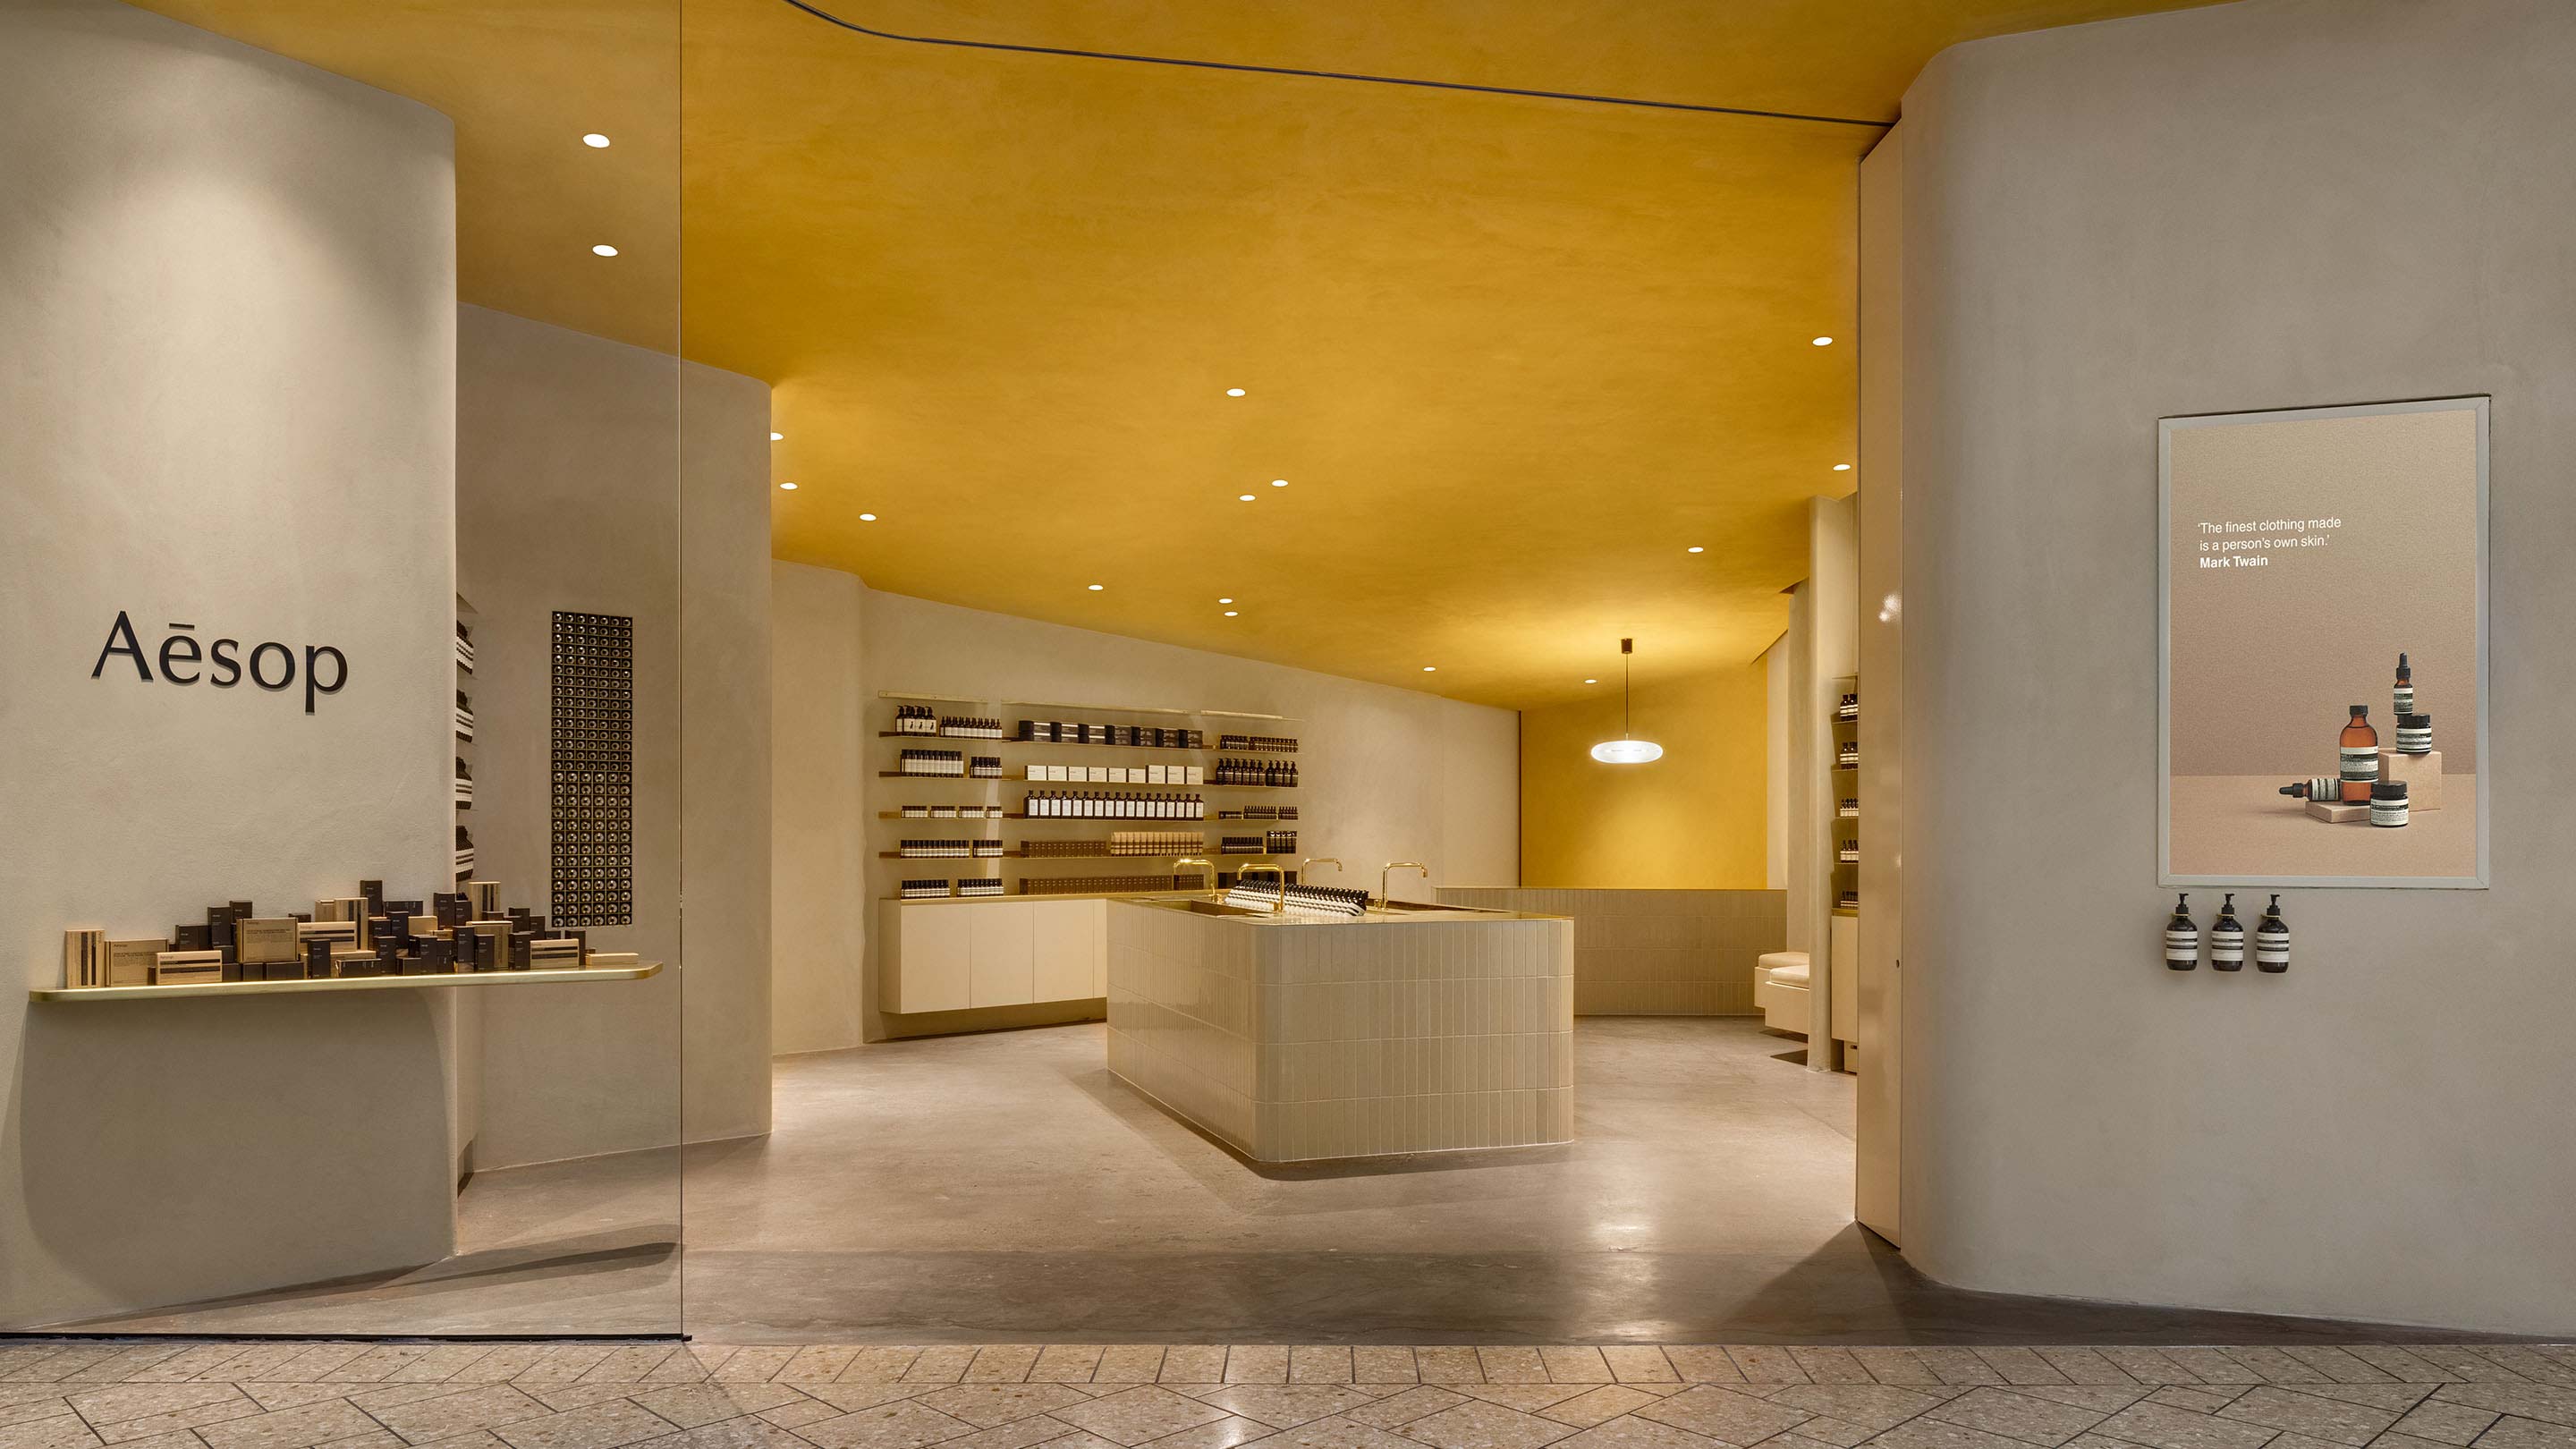 A minimalist concrete store interior juxtaposed with a yellow ceiling; a tiled sink sits at the centre of the shop floor.